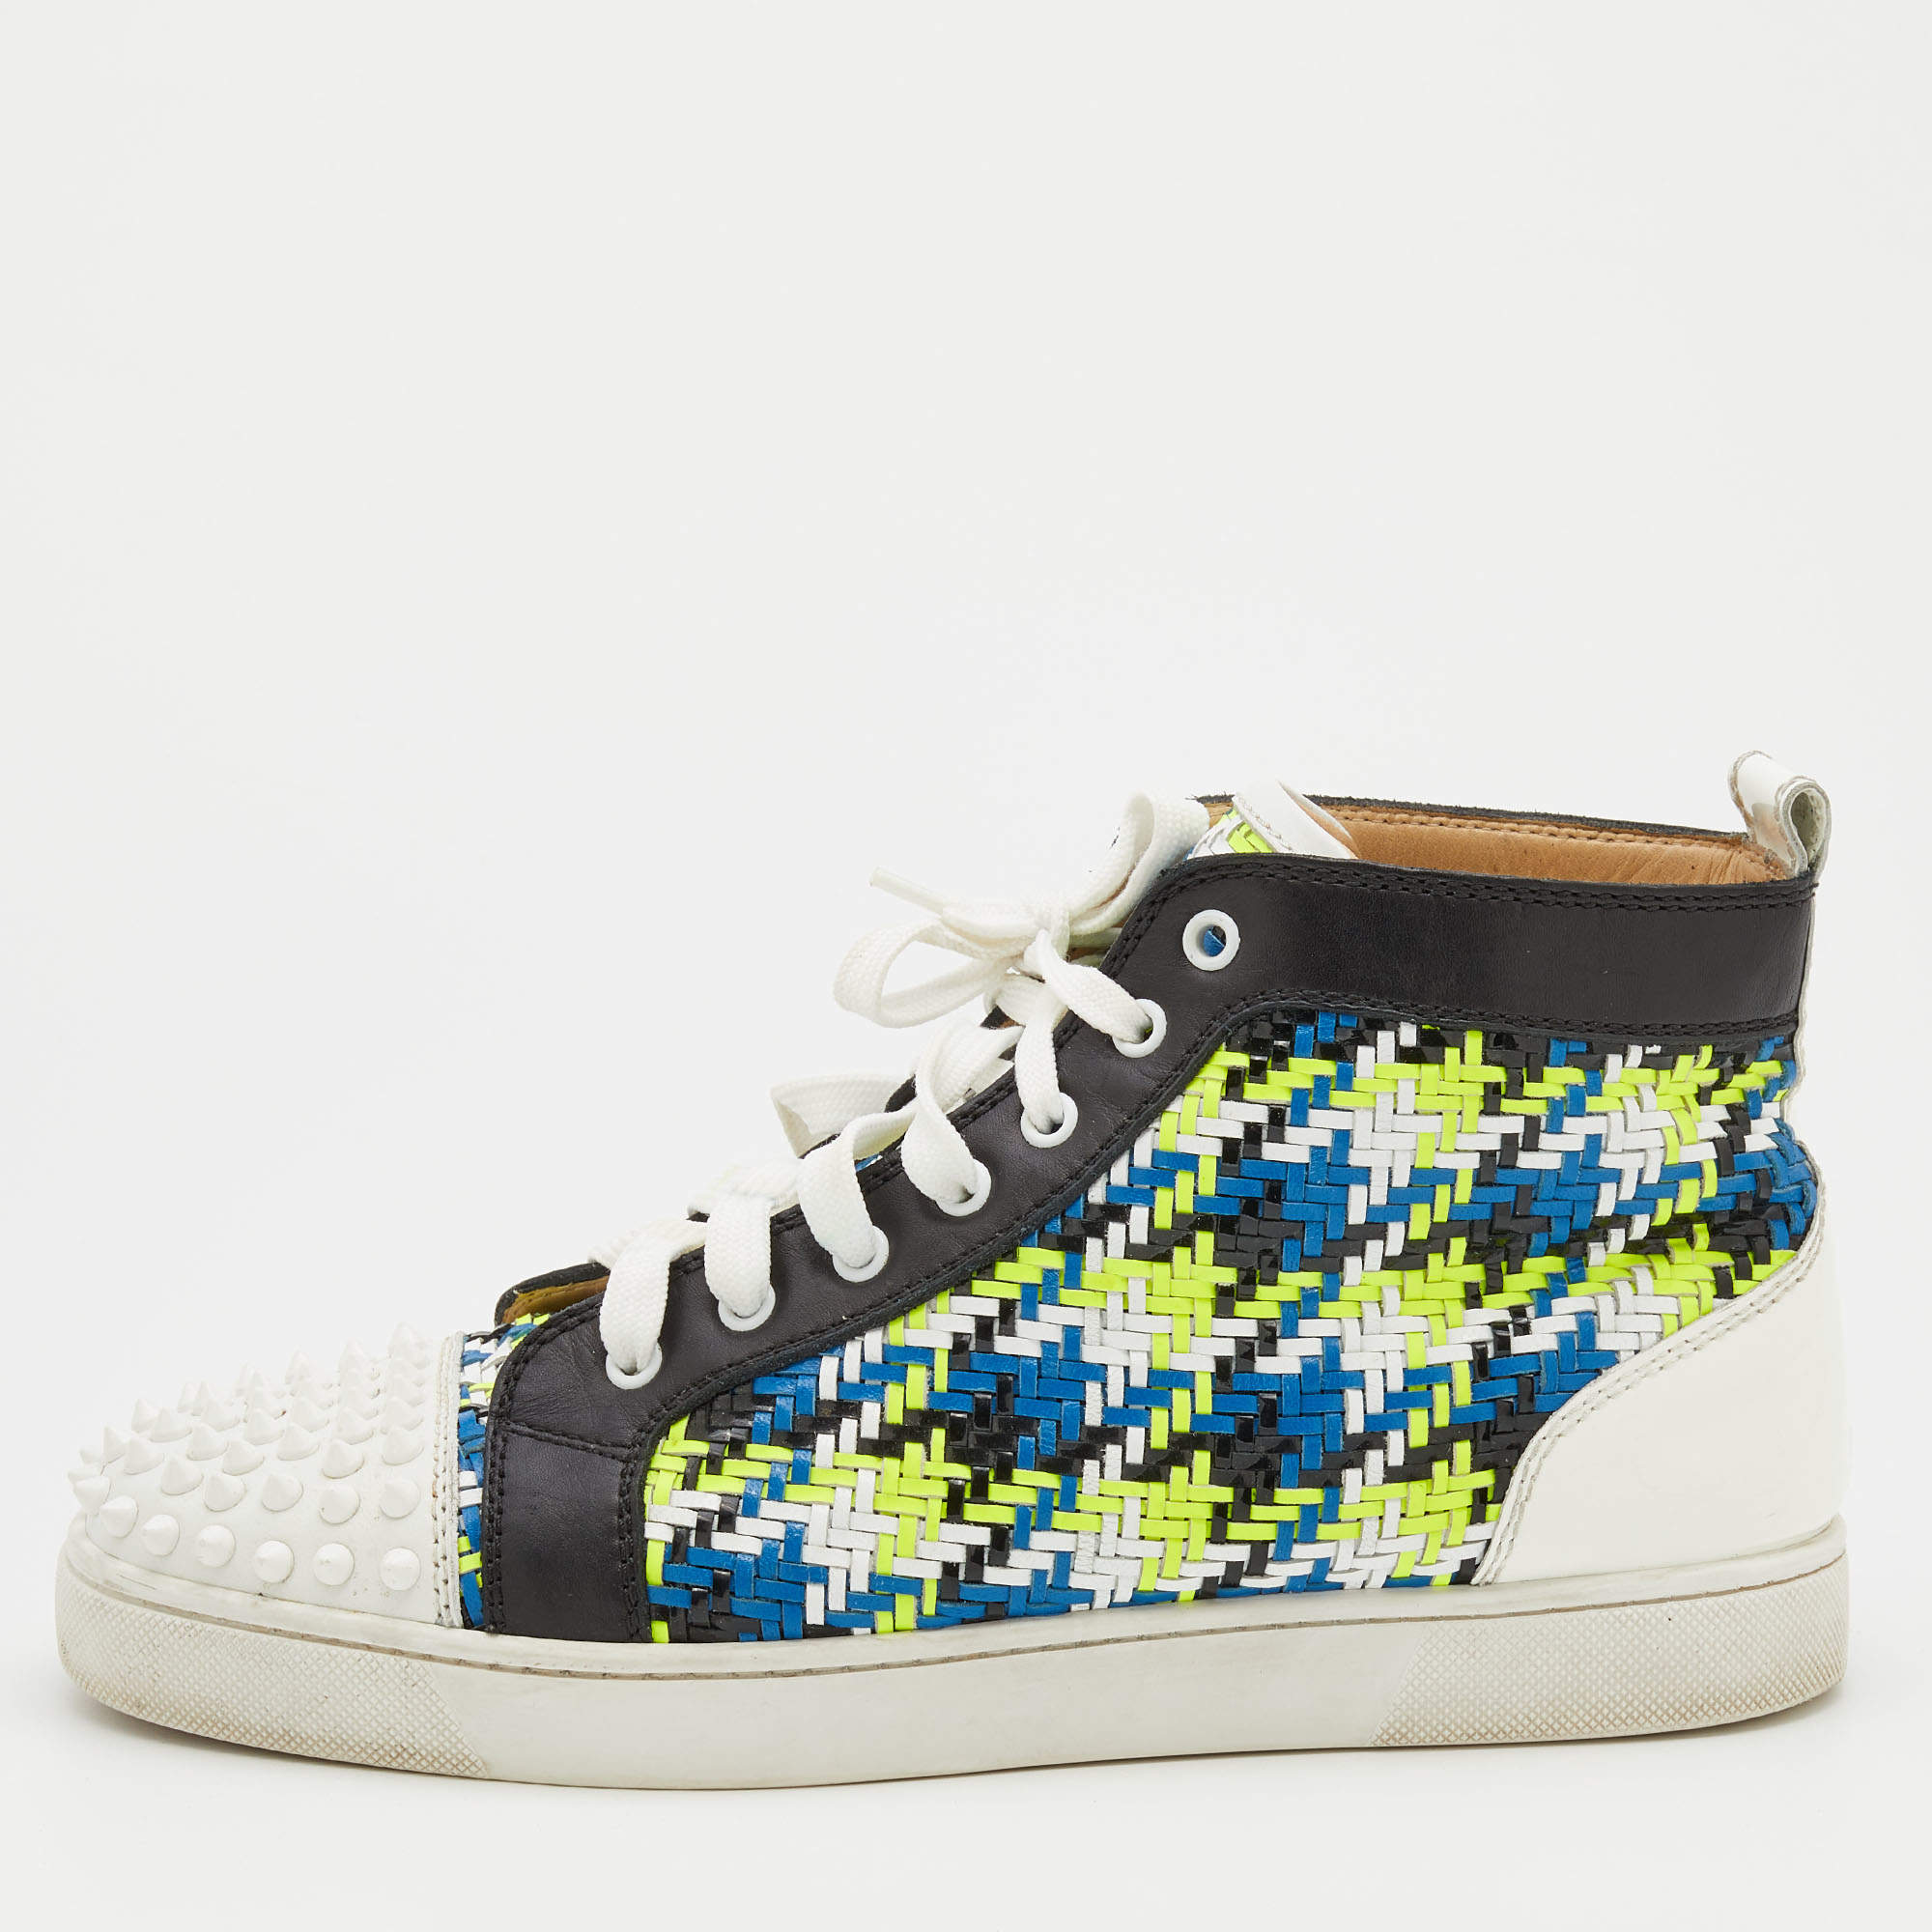 Christian Louboutin Multicolor Woven Leather Louis Spikes Cap Toe High Top Sneakers Size 41.5